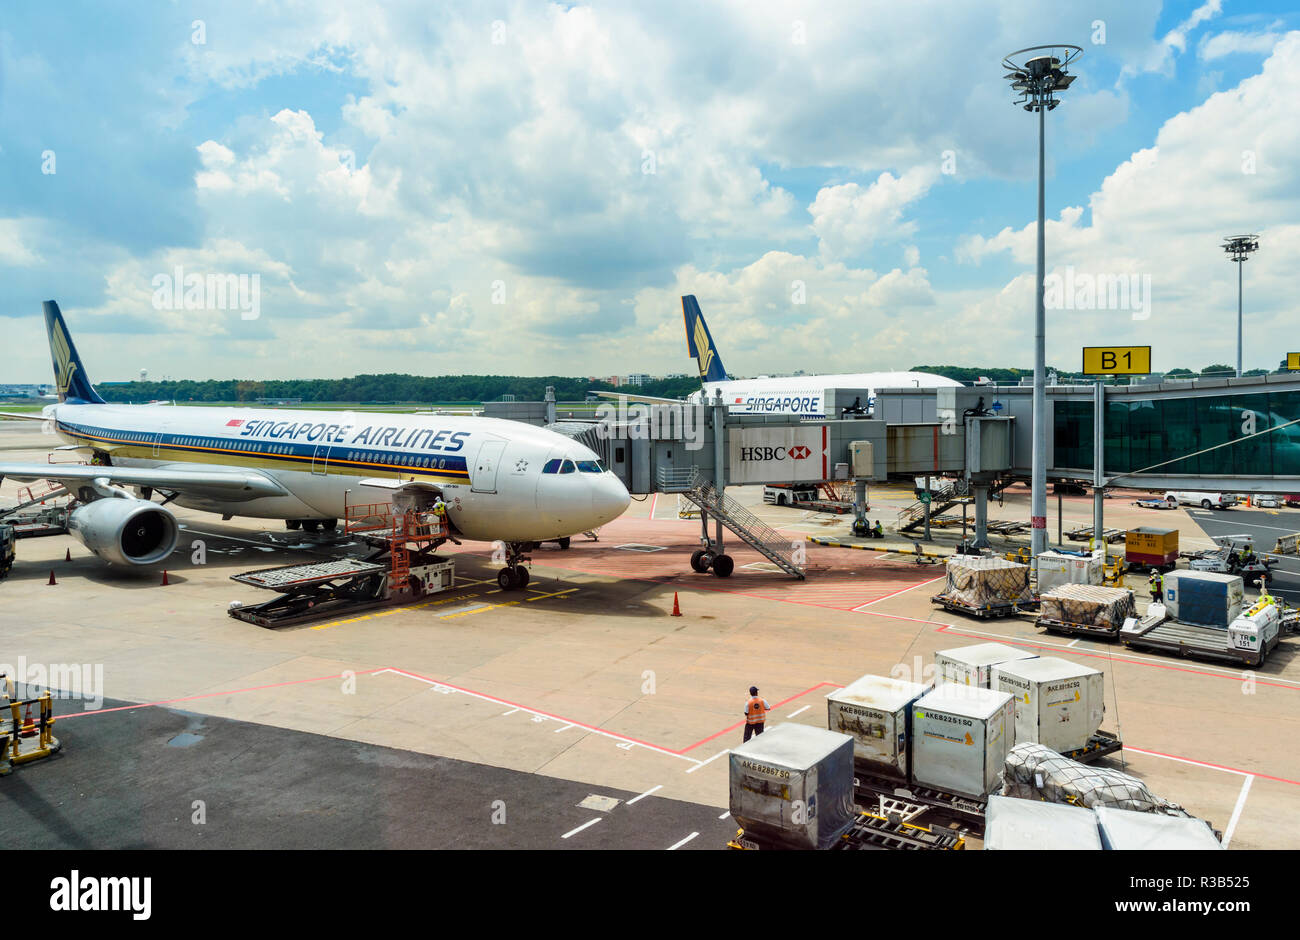 Singapore Airlines planes at Terminal 3, Changi Airport, Singapore Stock Photo